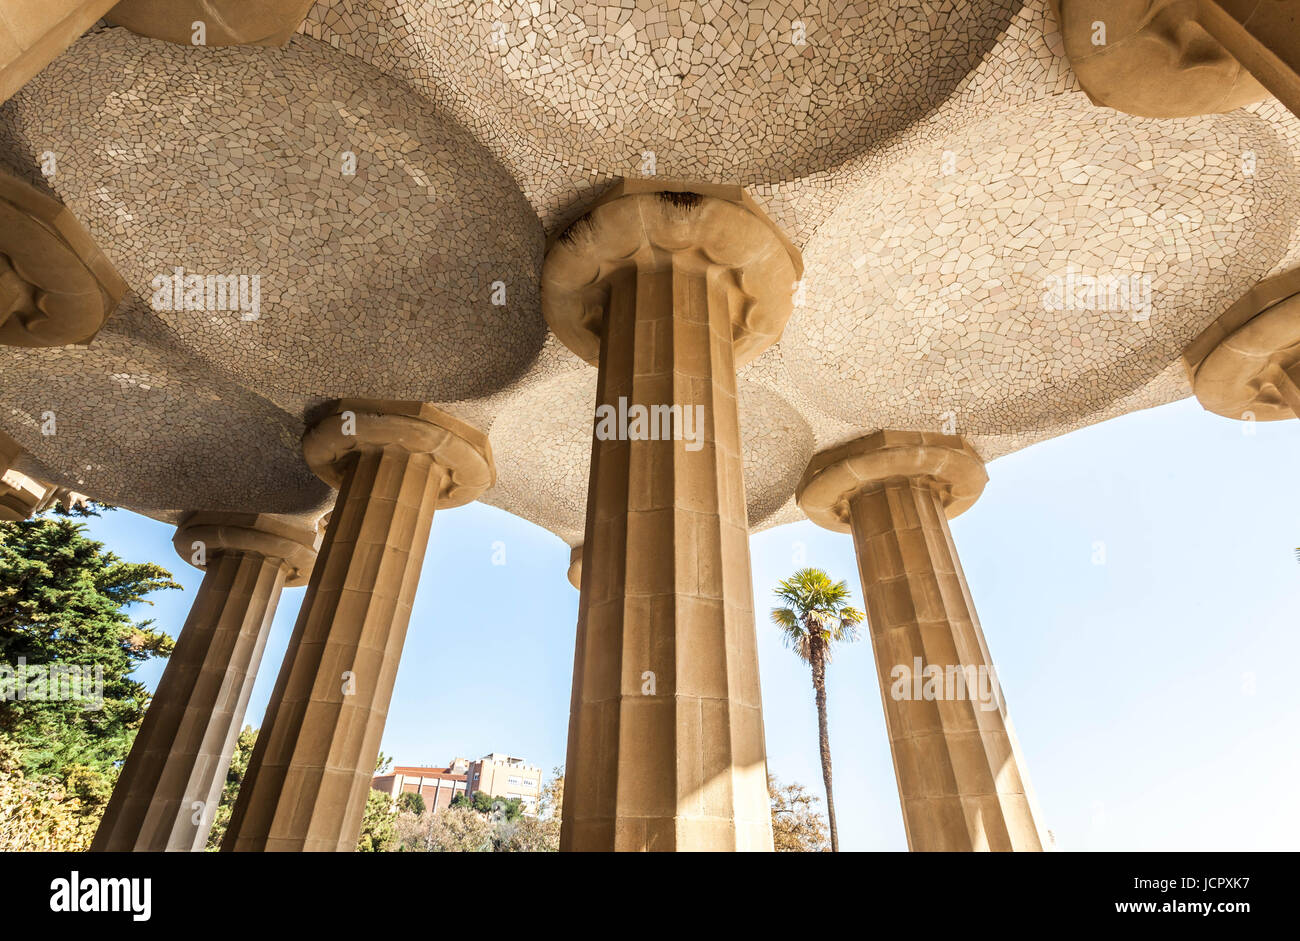 Low angle view of the ceiling and columns At Parc Güell, Barcelona, Spain. Stock Photo